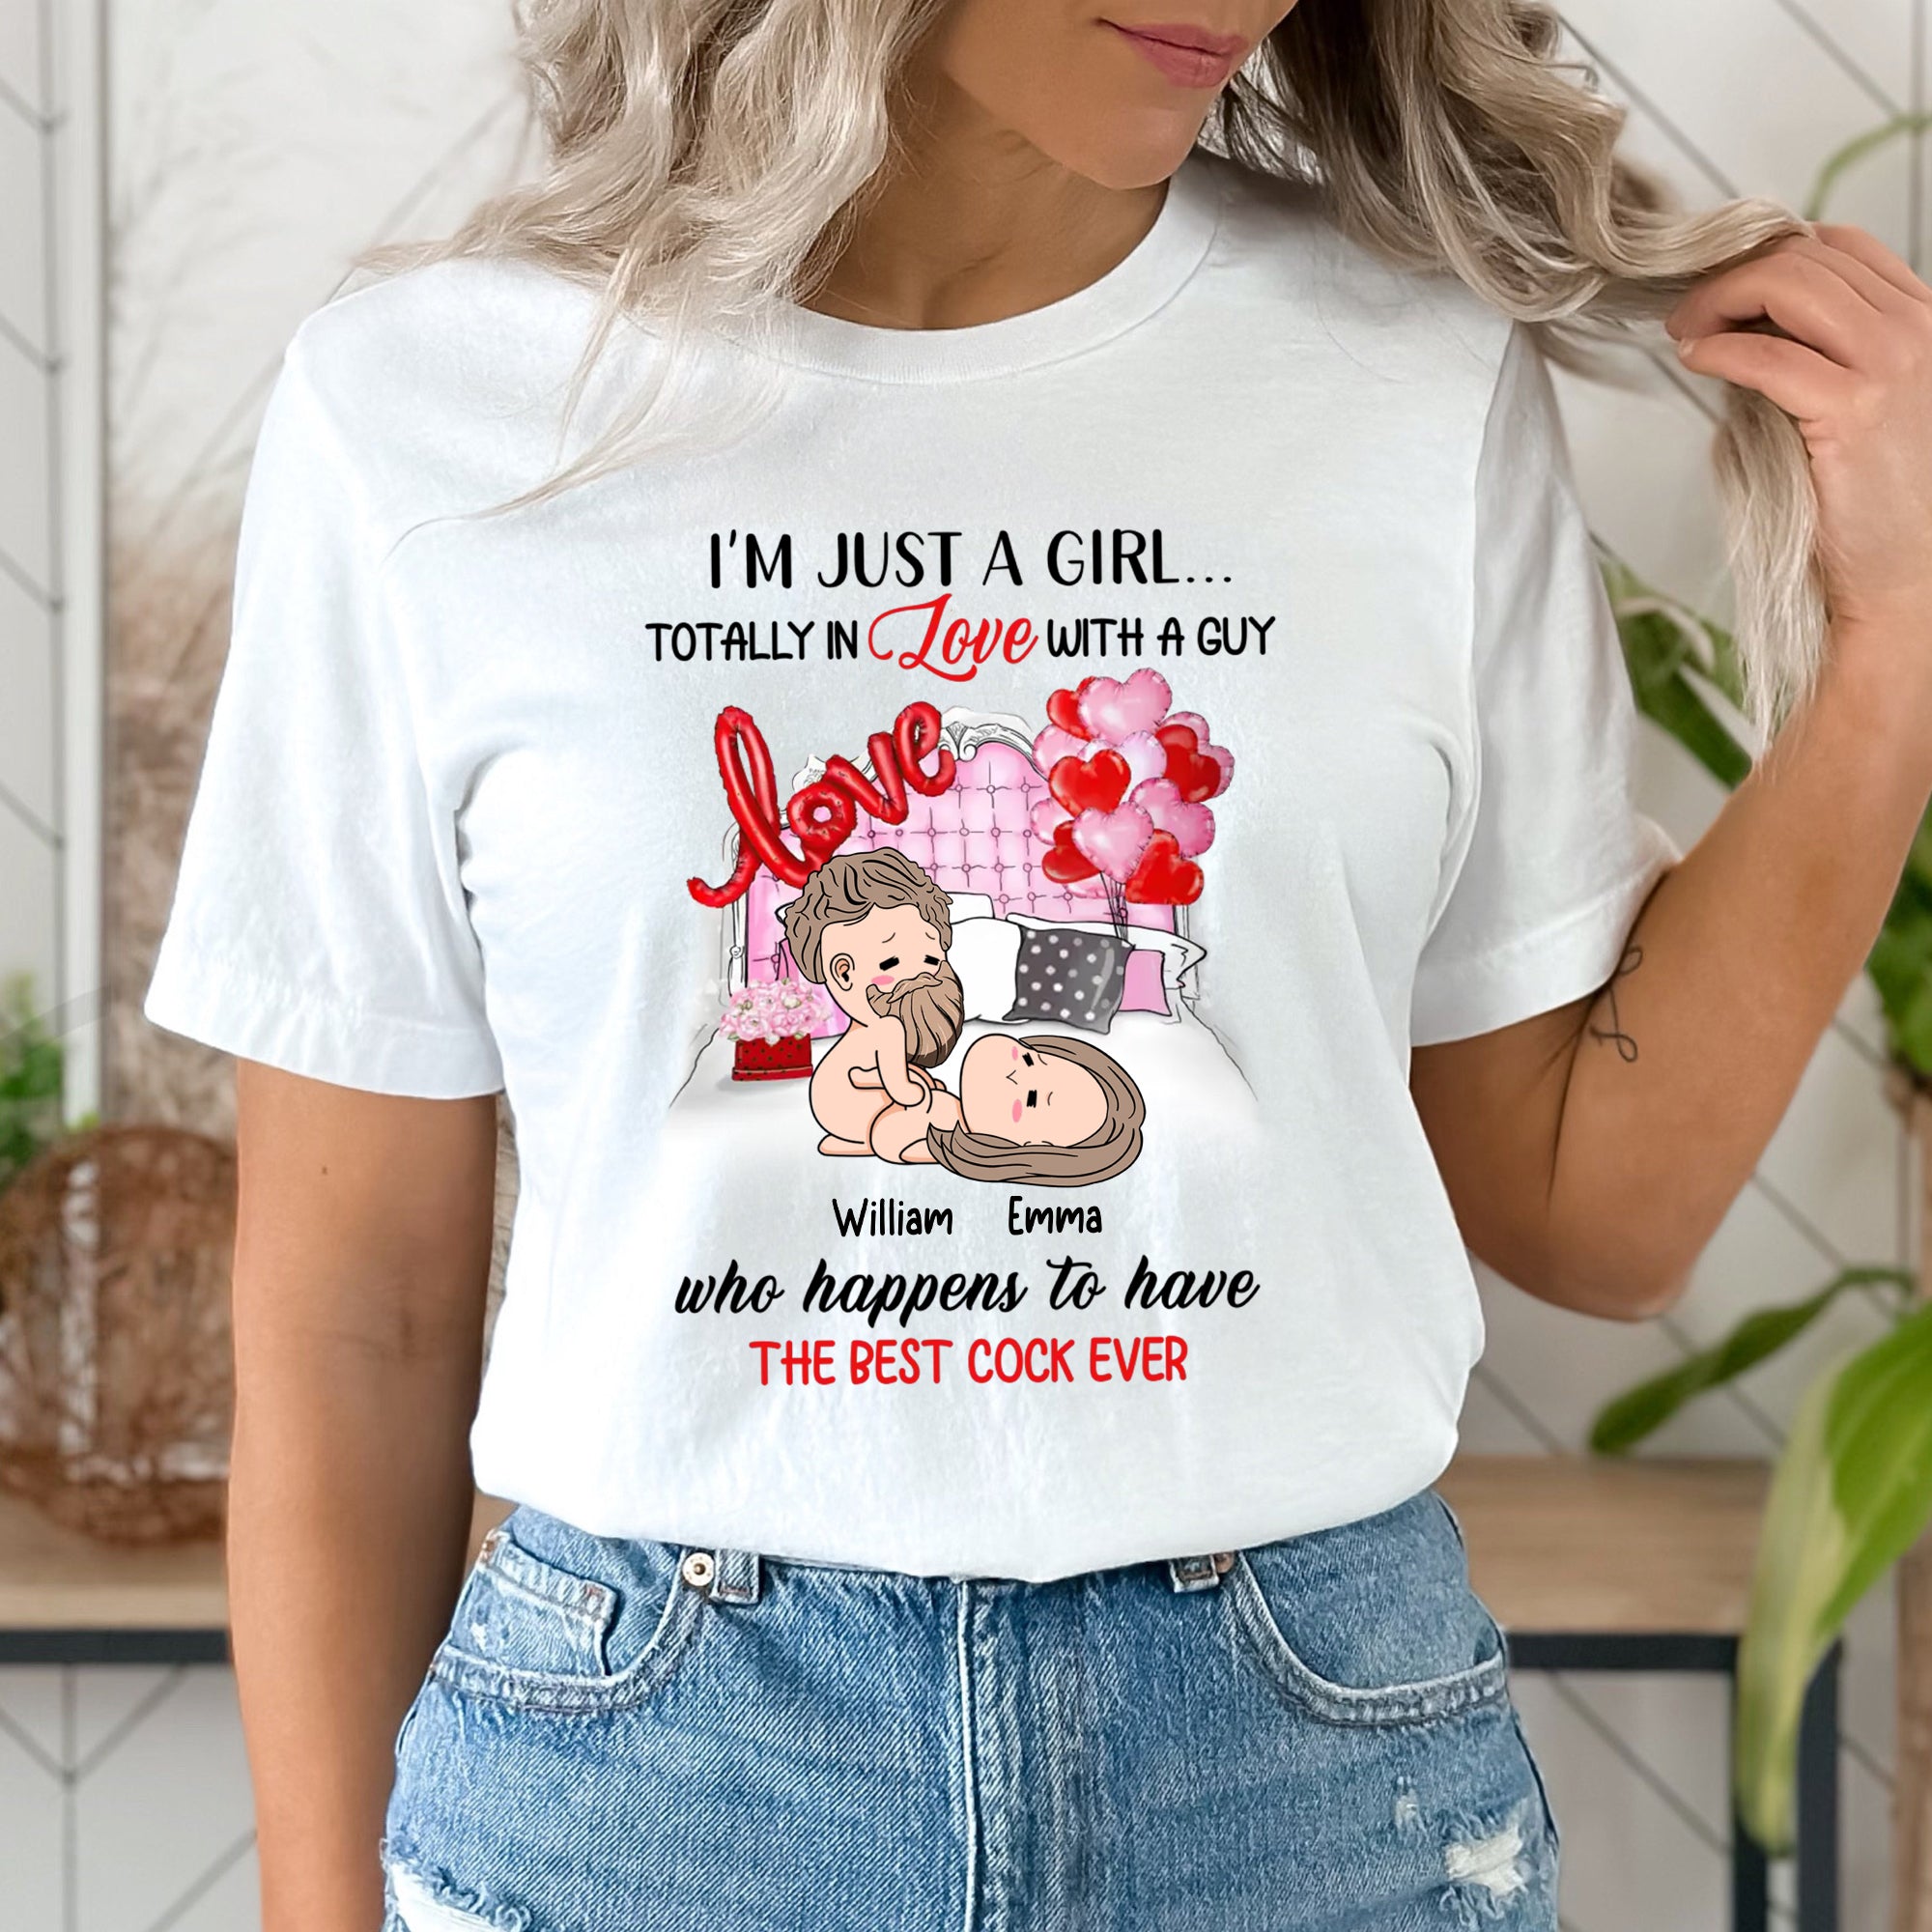 I'm Just A Girl Totally In Love With A Guy - Custom Appearances And Texts - Personalized T-Shirt - Couple Gift